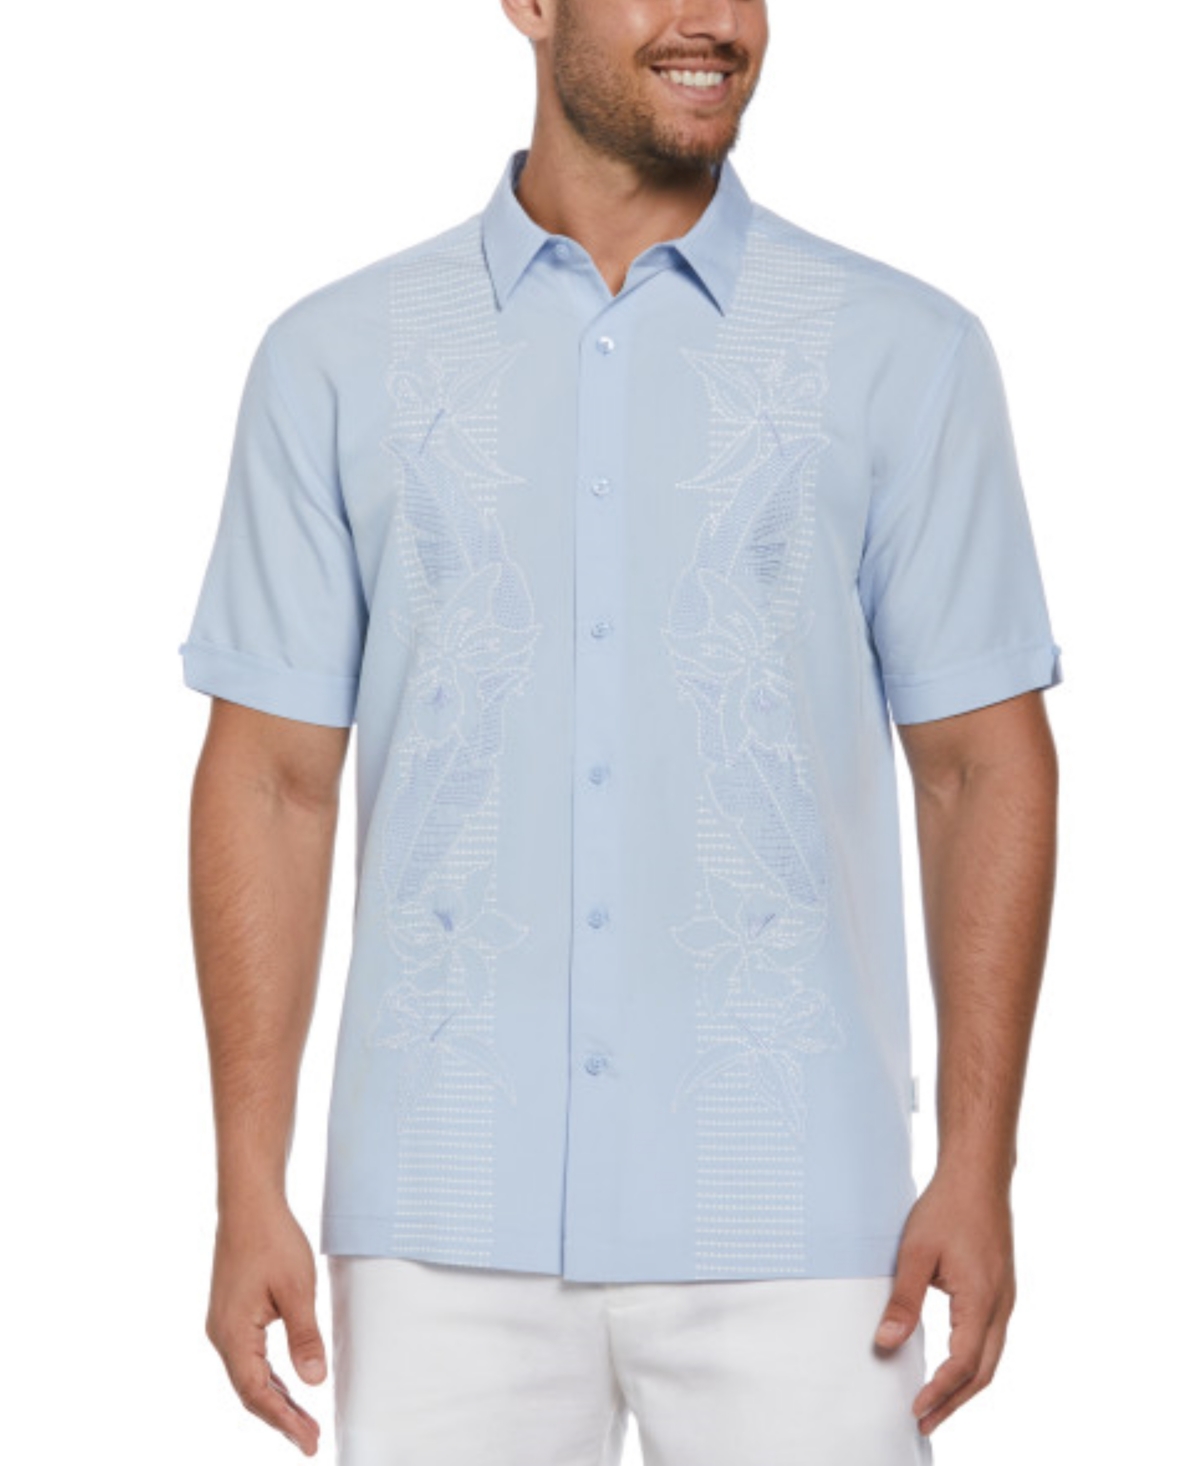 Men's Big & Tall Floral Embroidered Panel Button-Down Shirt - Light Blue